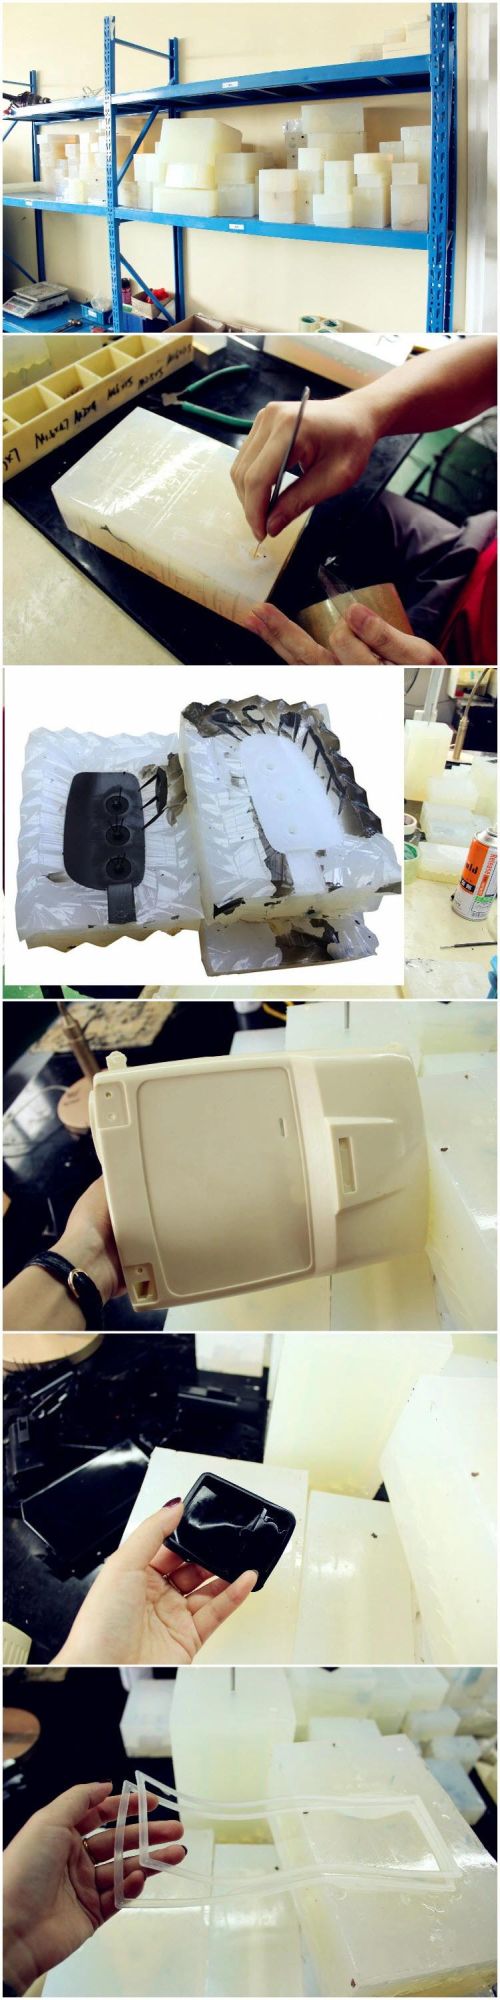 Vacuum Casting Silicone Mold for Toy Car